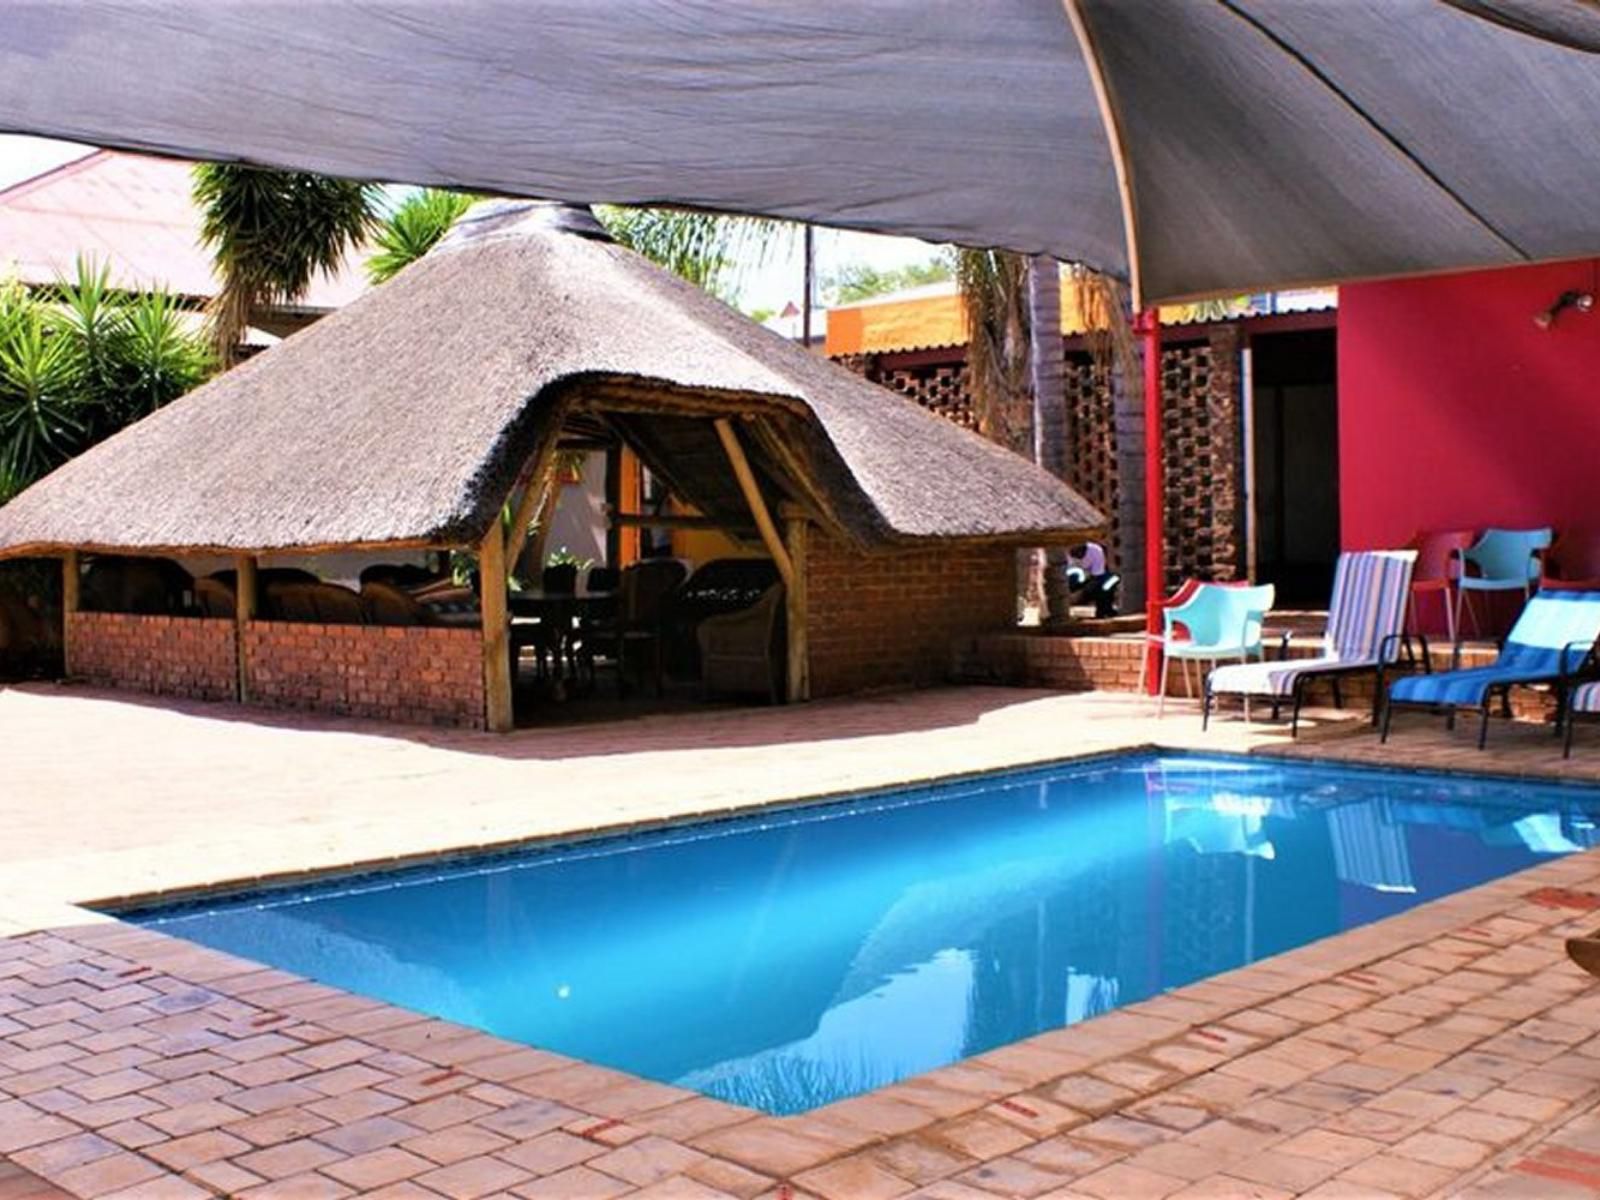 Tshinakie Guesthouse Sunnyside Pretoria Tshwane Gauteng South Africa Complementary Colors, Swimming Pool